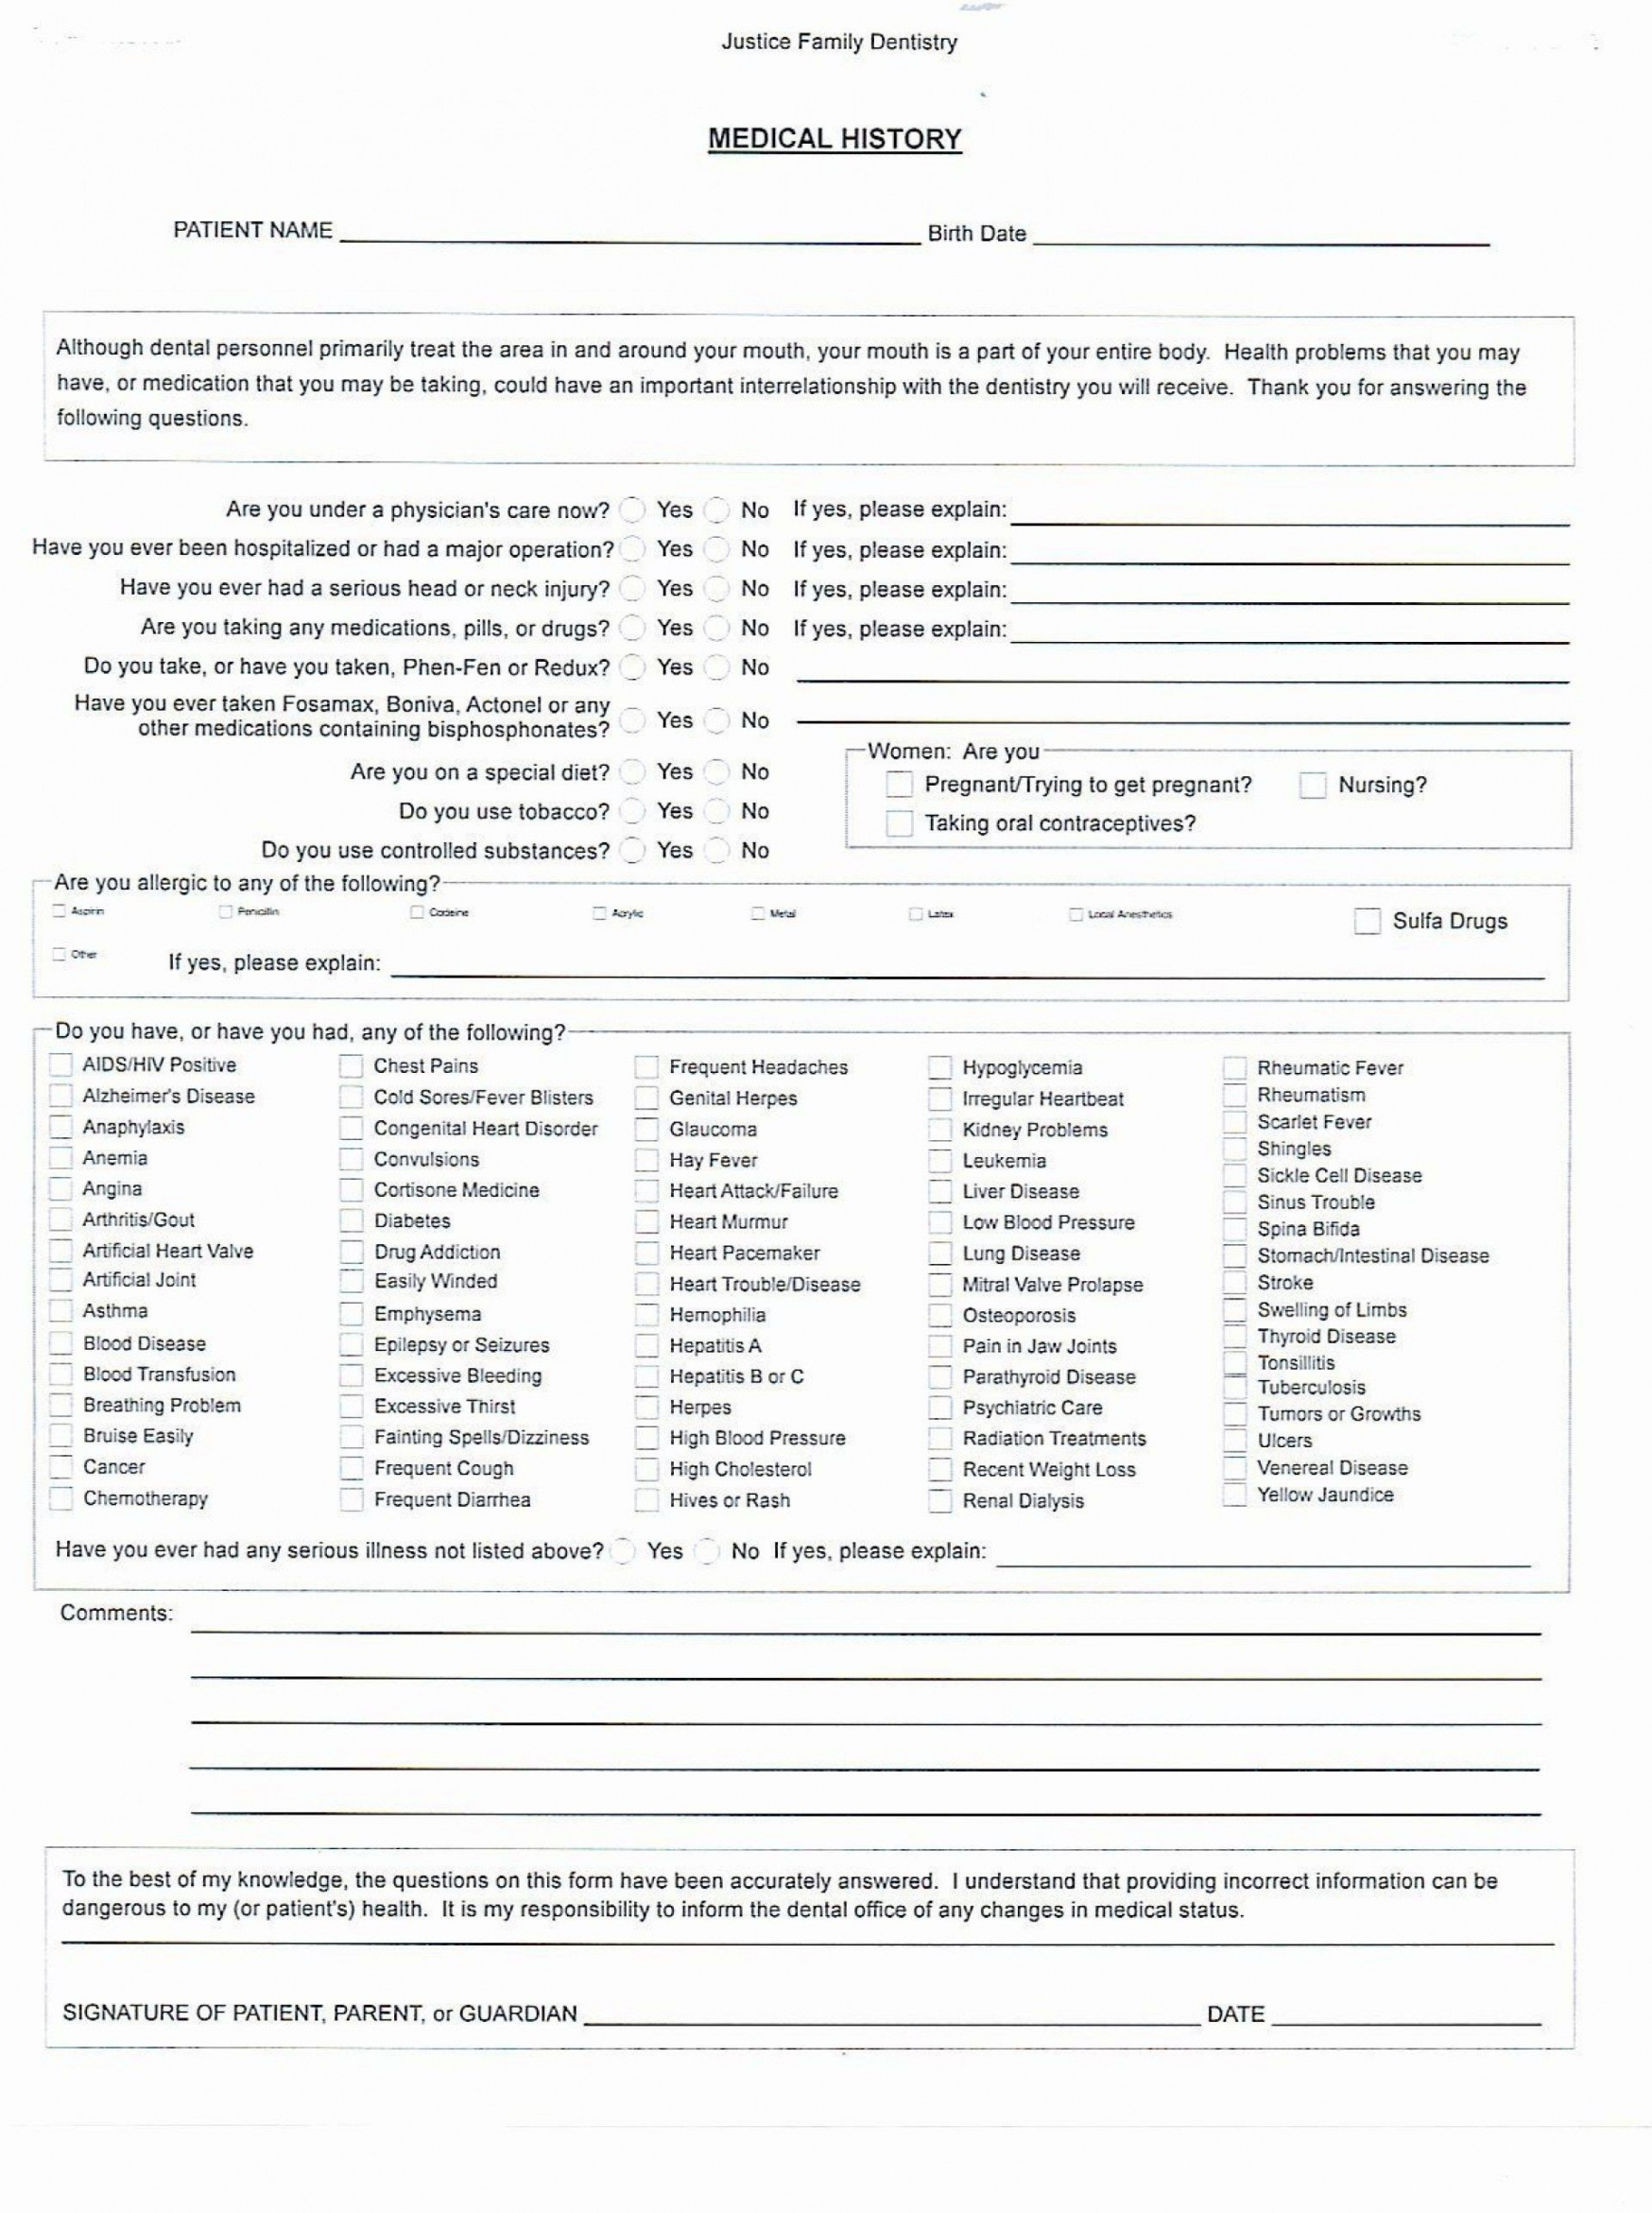 sample medical history form templates ~ addictionary dental patient information form template sample